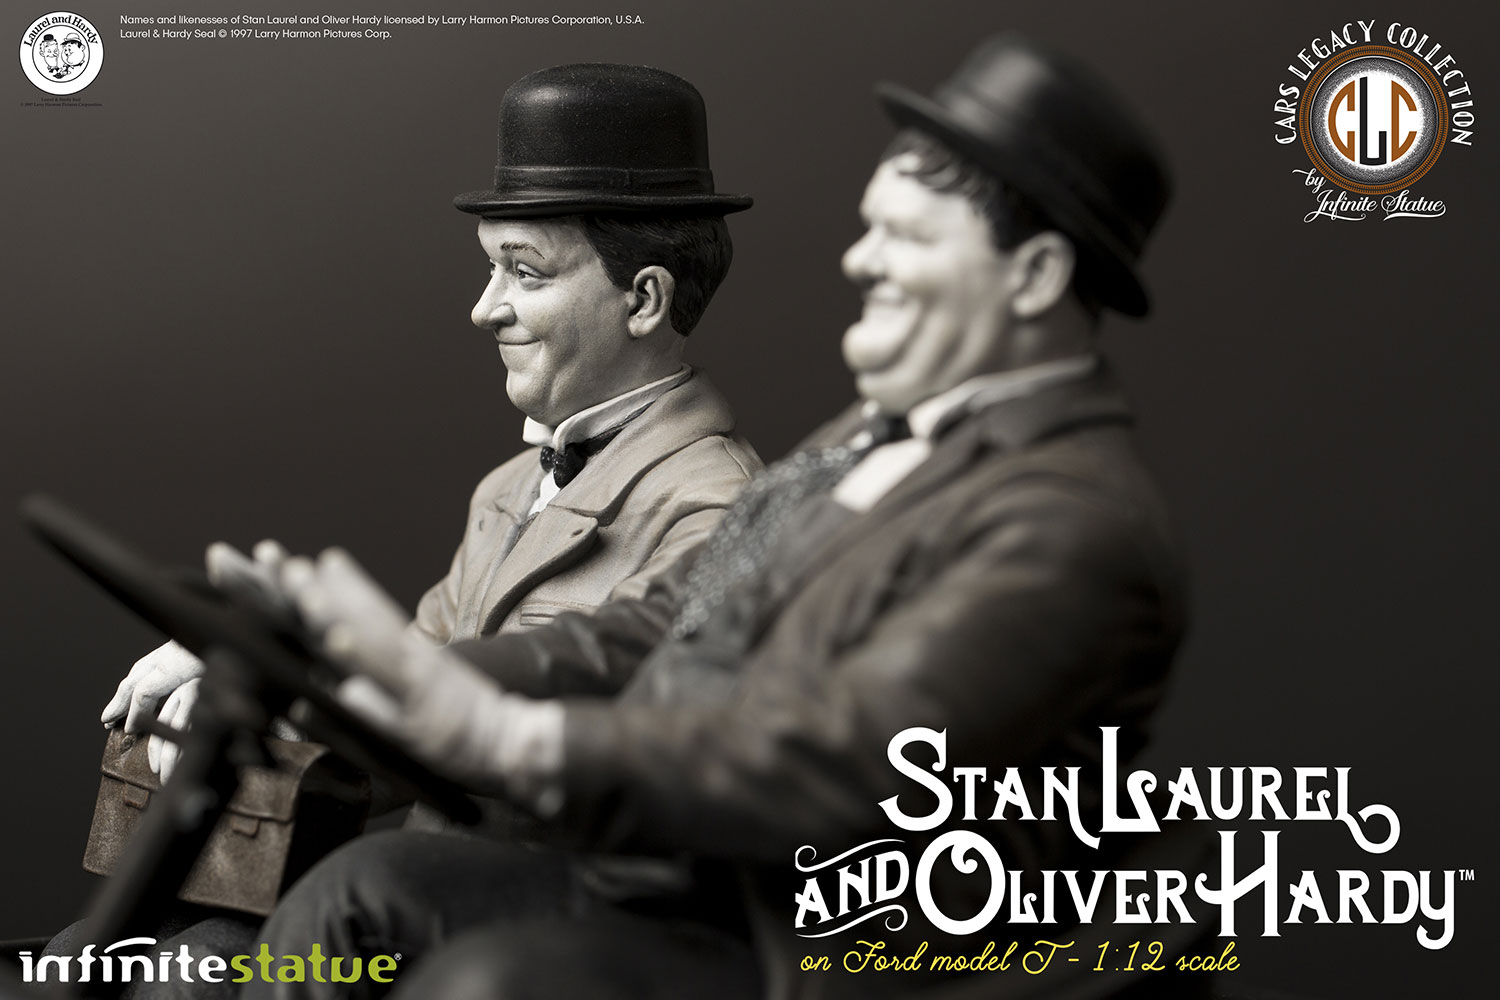 Laurel & Hardy on Ford Model T (Prototype Shown) View 5